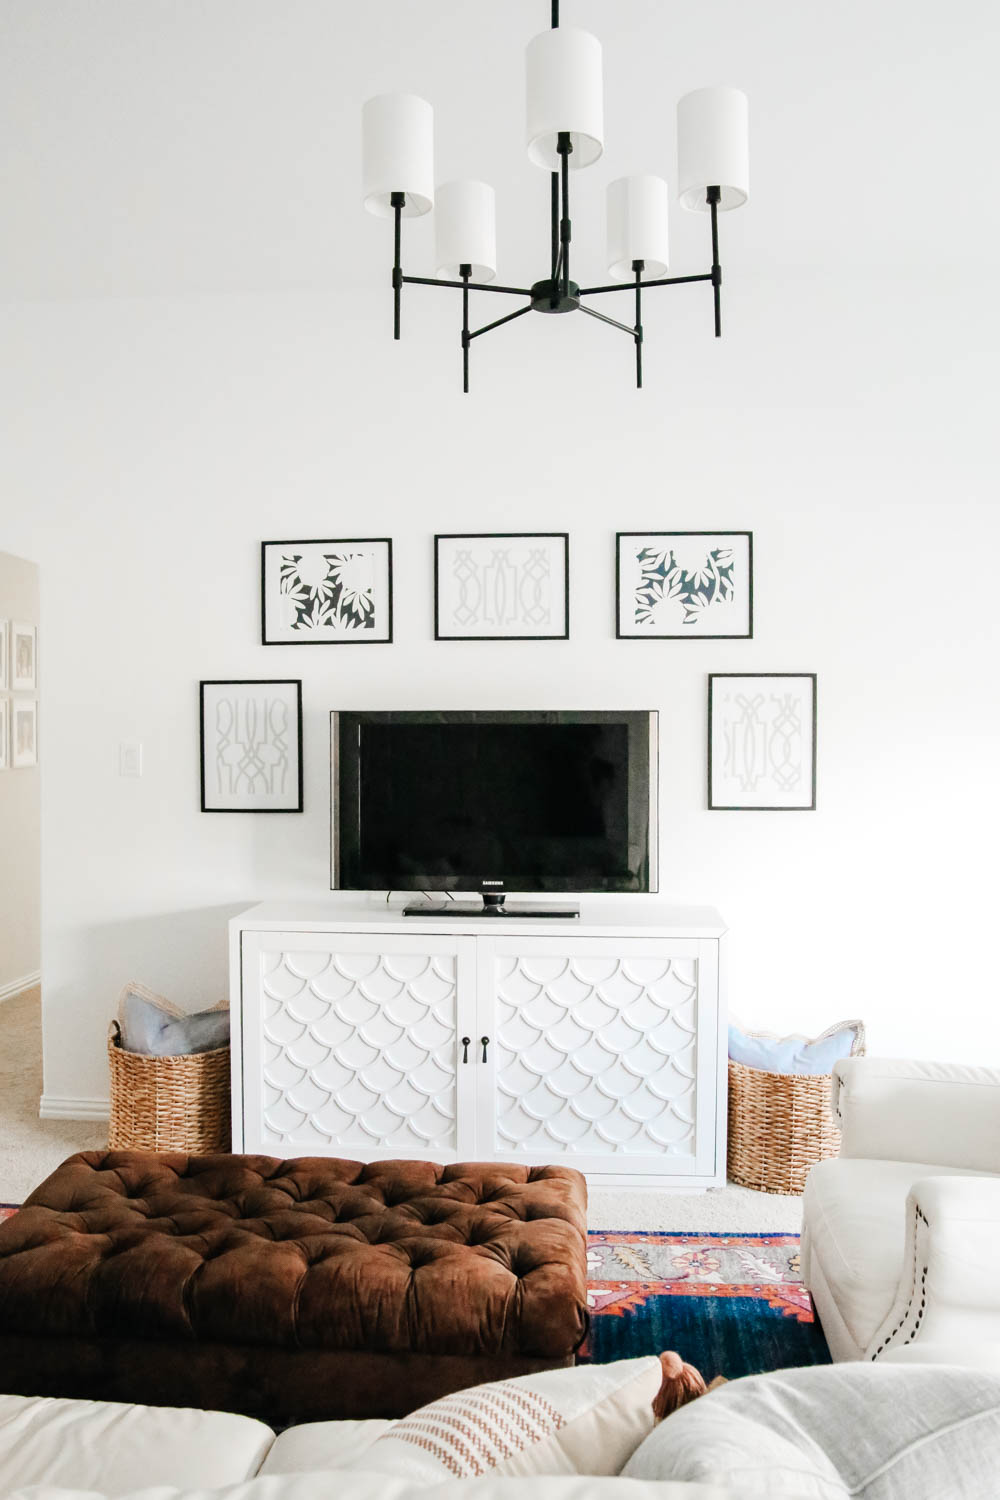 How to Decorate Around A TV